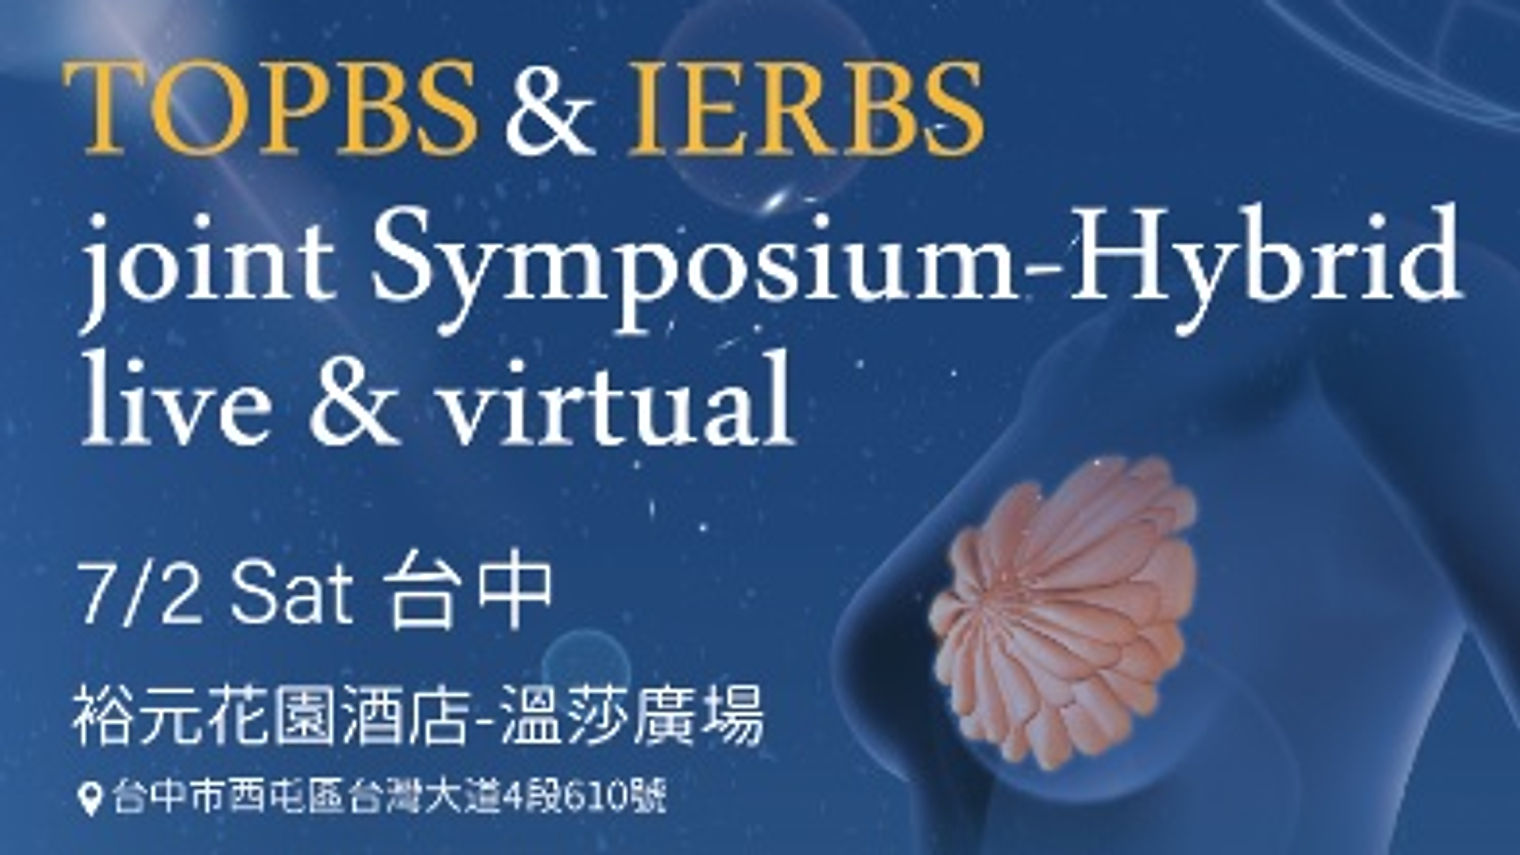 TOPBS & IERBS 2022 Joint Symposium